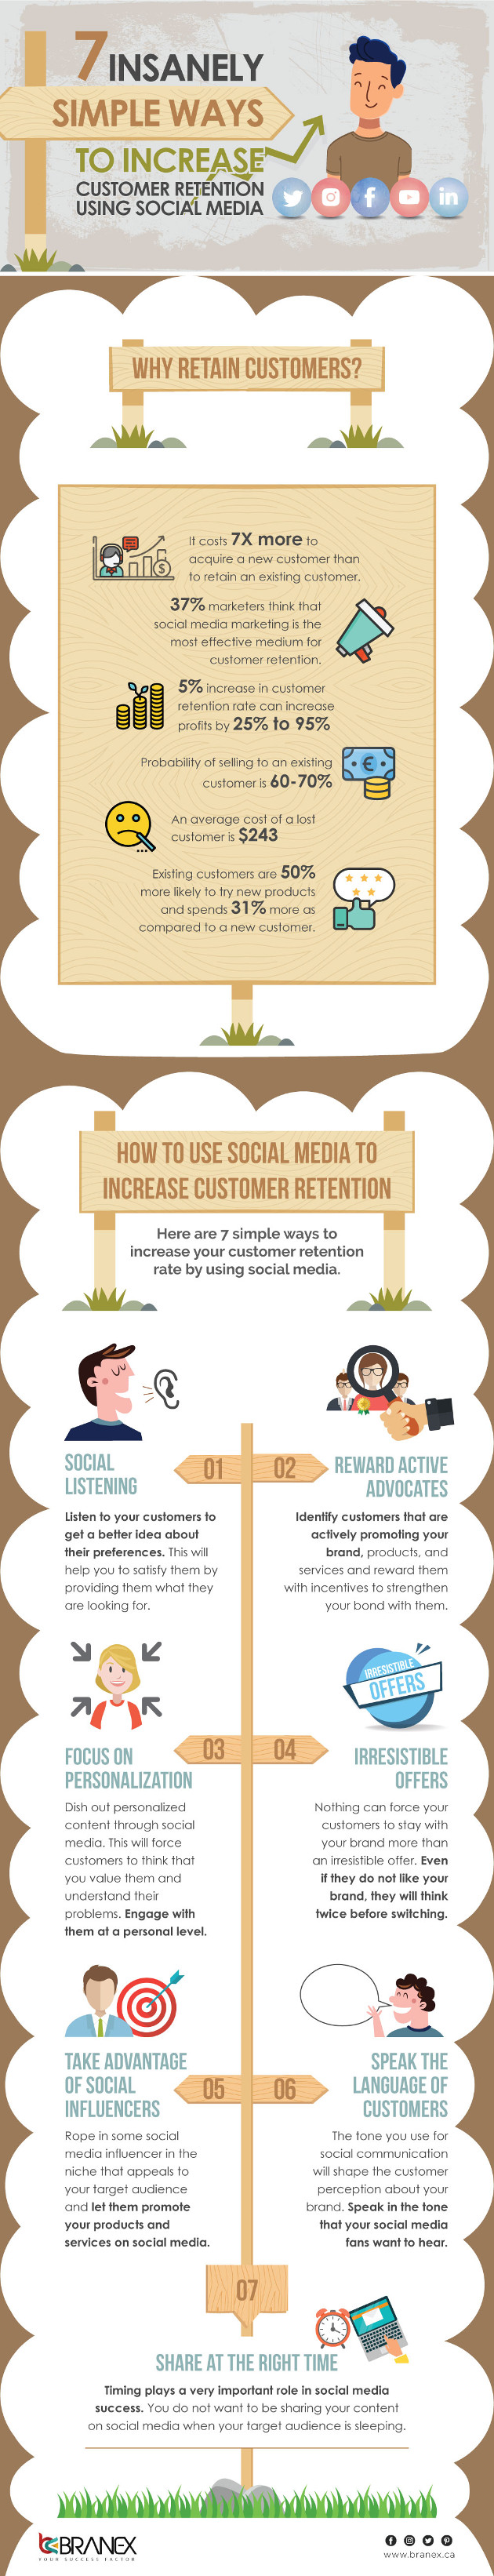 Seven Simple Ways to Increase Customer Retention Using Social Media 